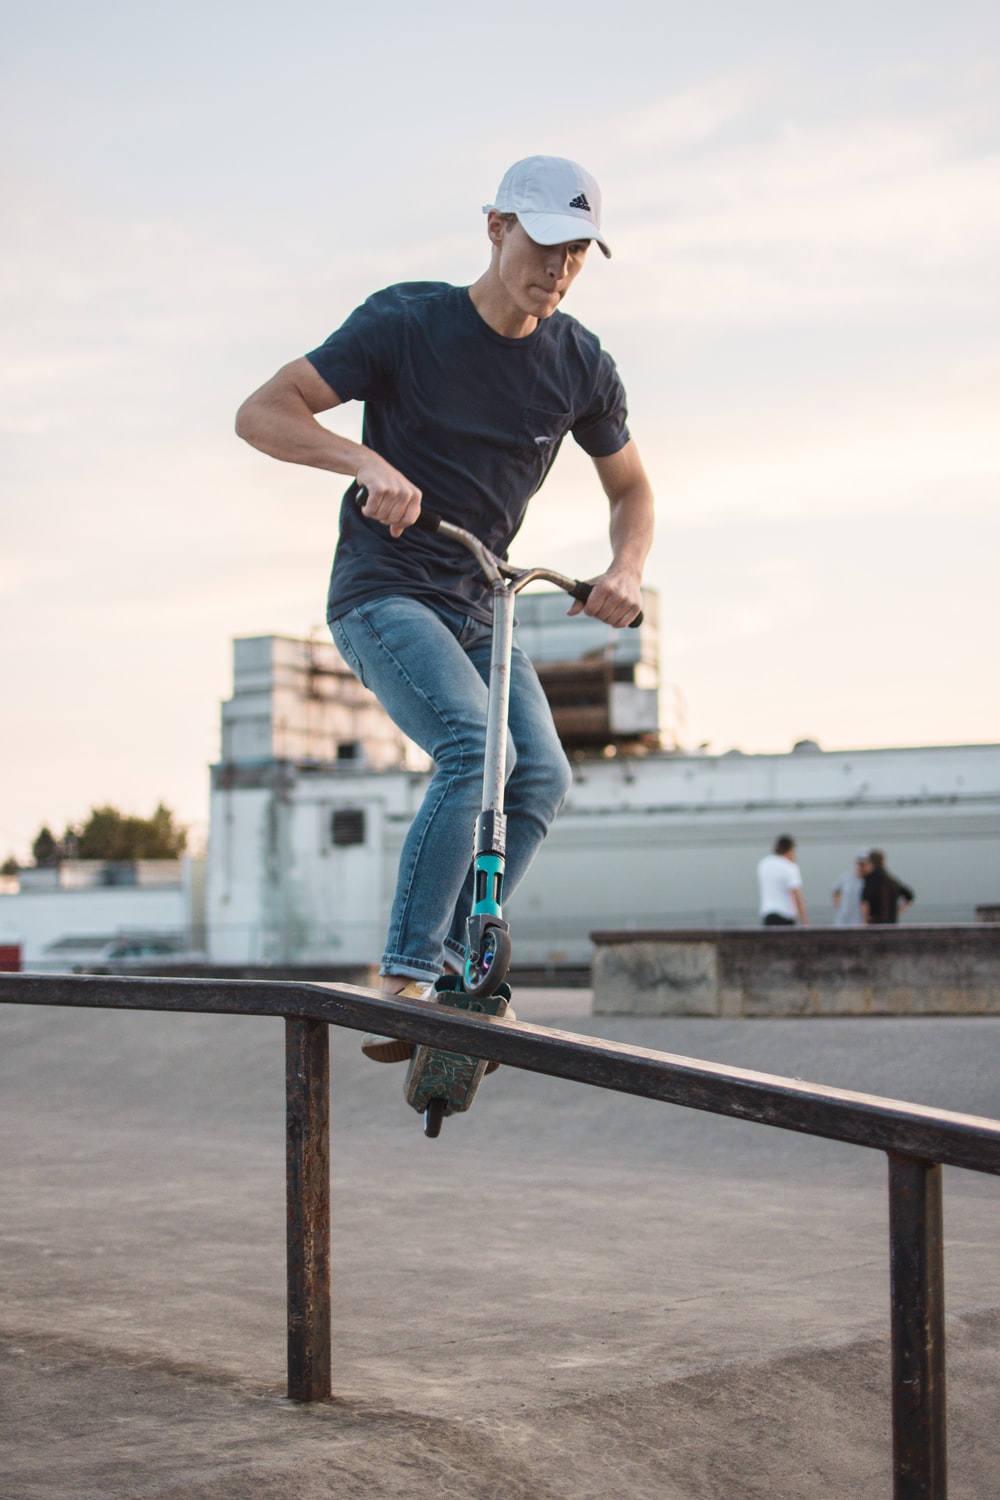 Scooter Trick Picture. Download Free Image